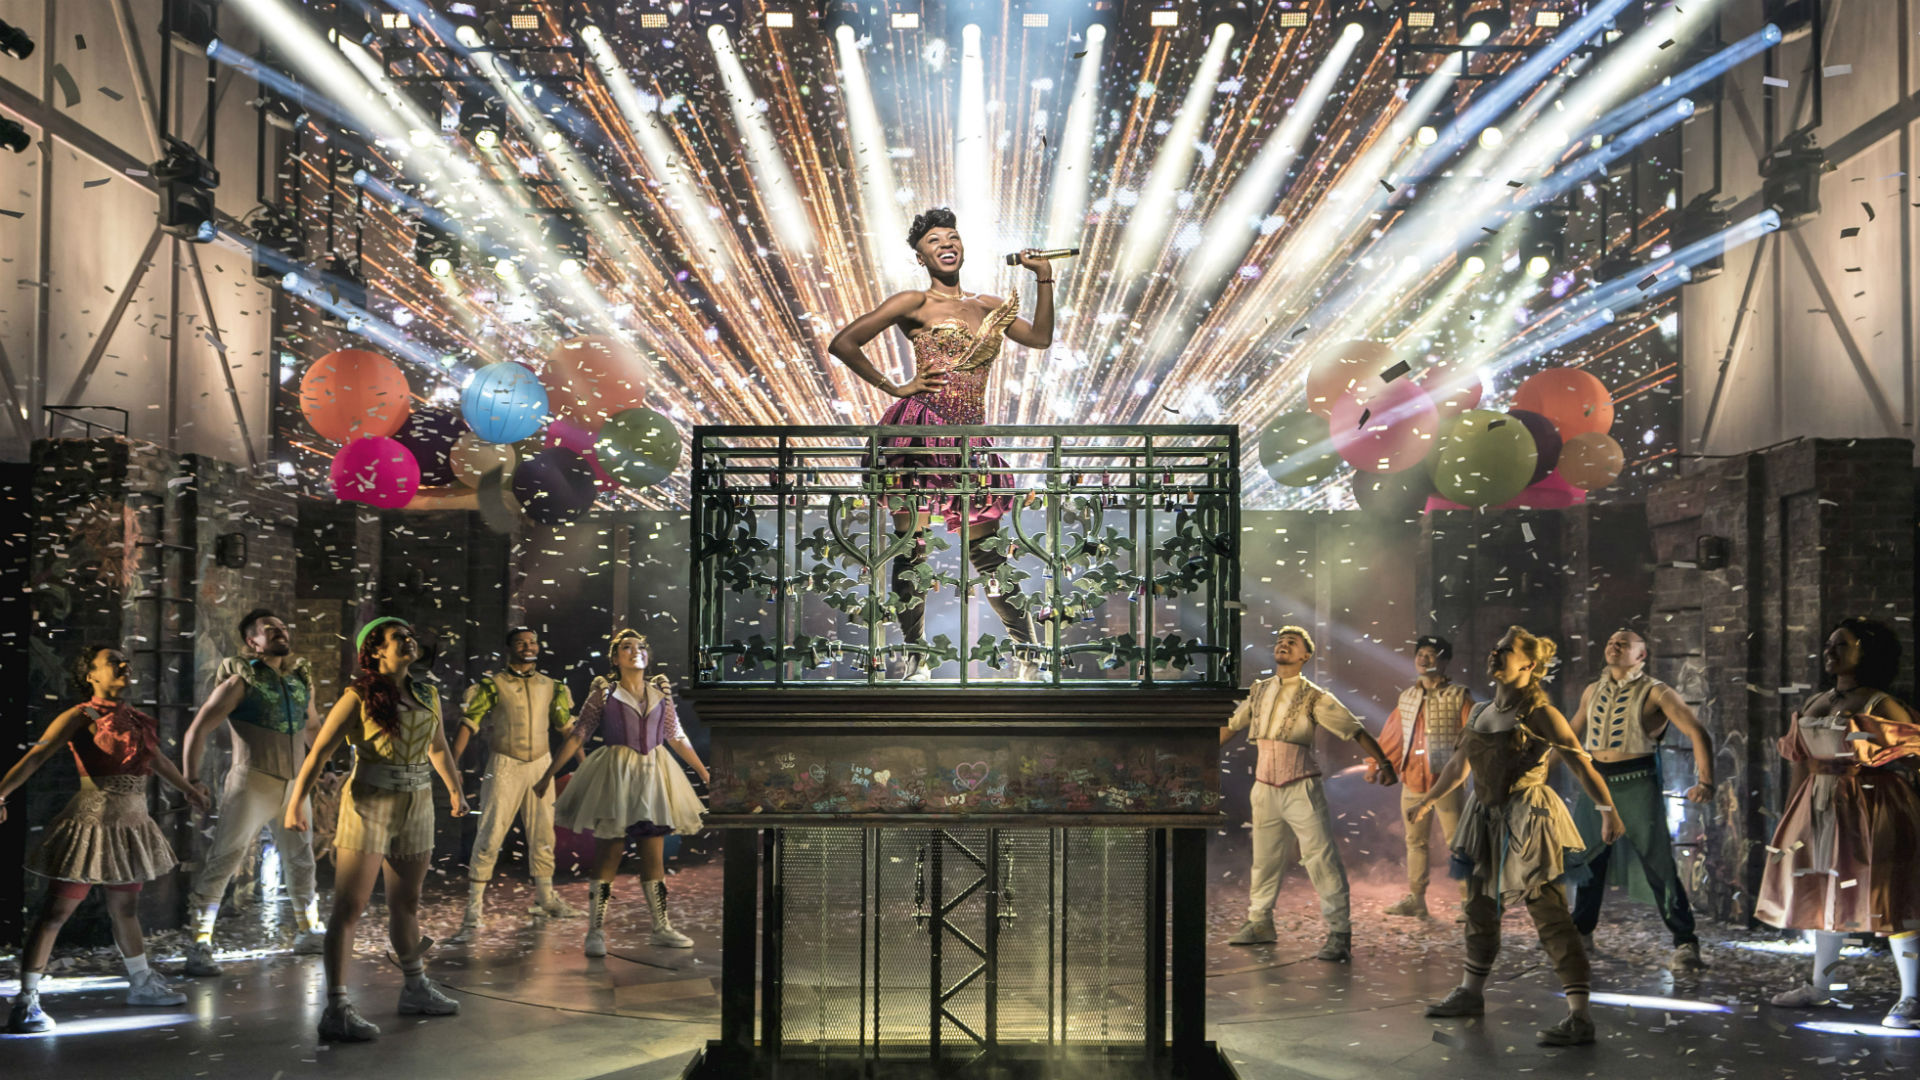 Juliet stands on a raised platform in the middle of the stage surrounded by cast members, coloured balloons, lights and ticker tape. 